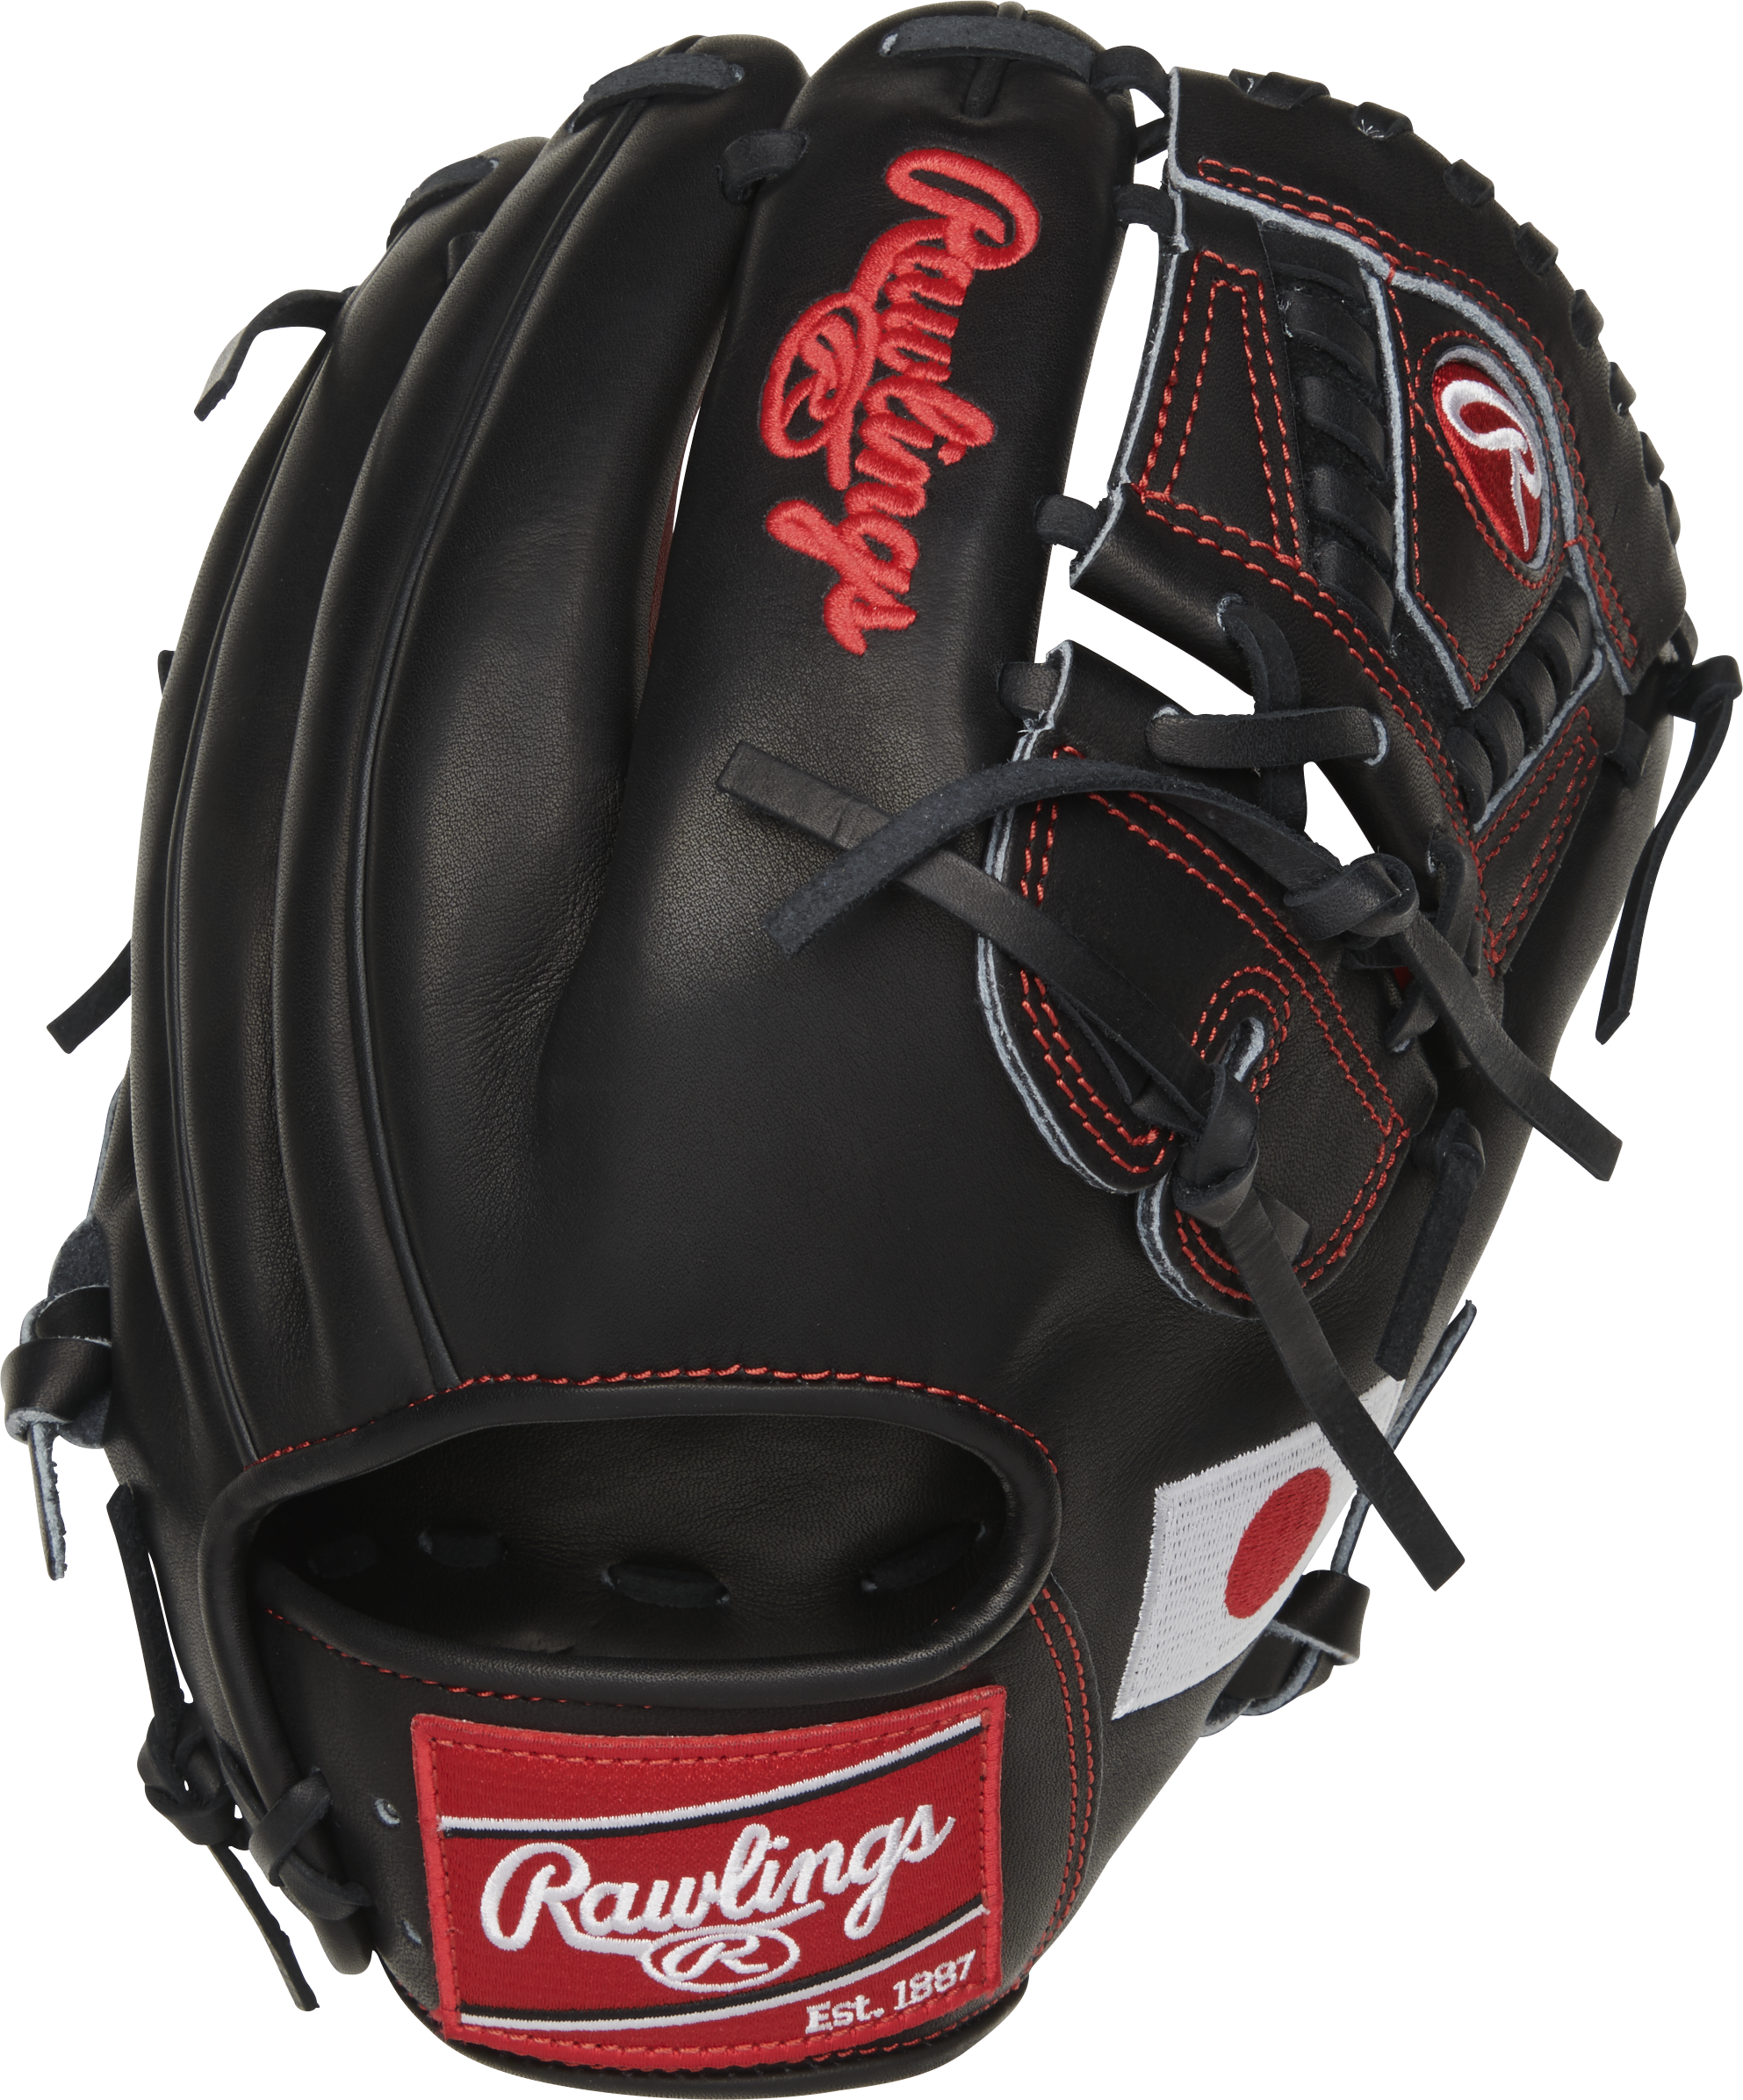 Rawlings Heart of the Hide Japan Infield/Pitcher's Glove | Special Edition | Midway Sports.